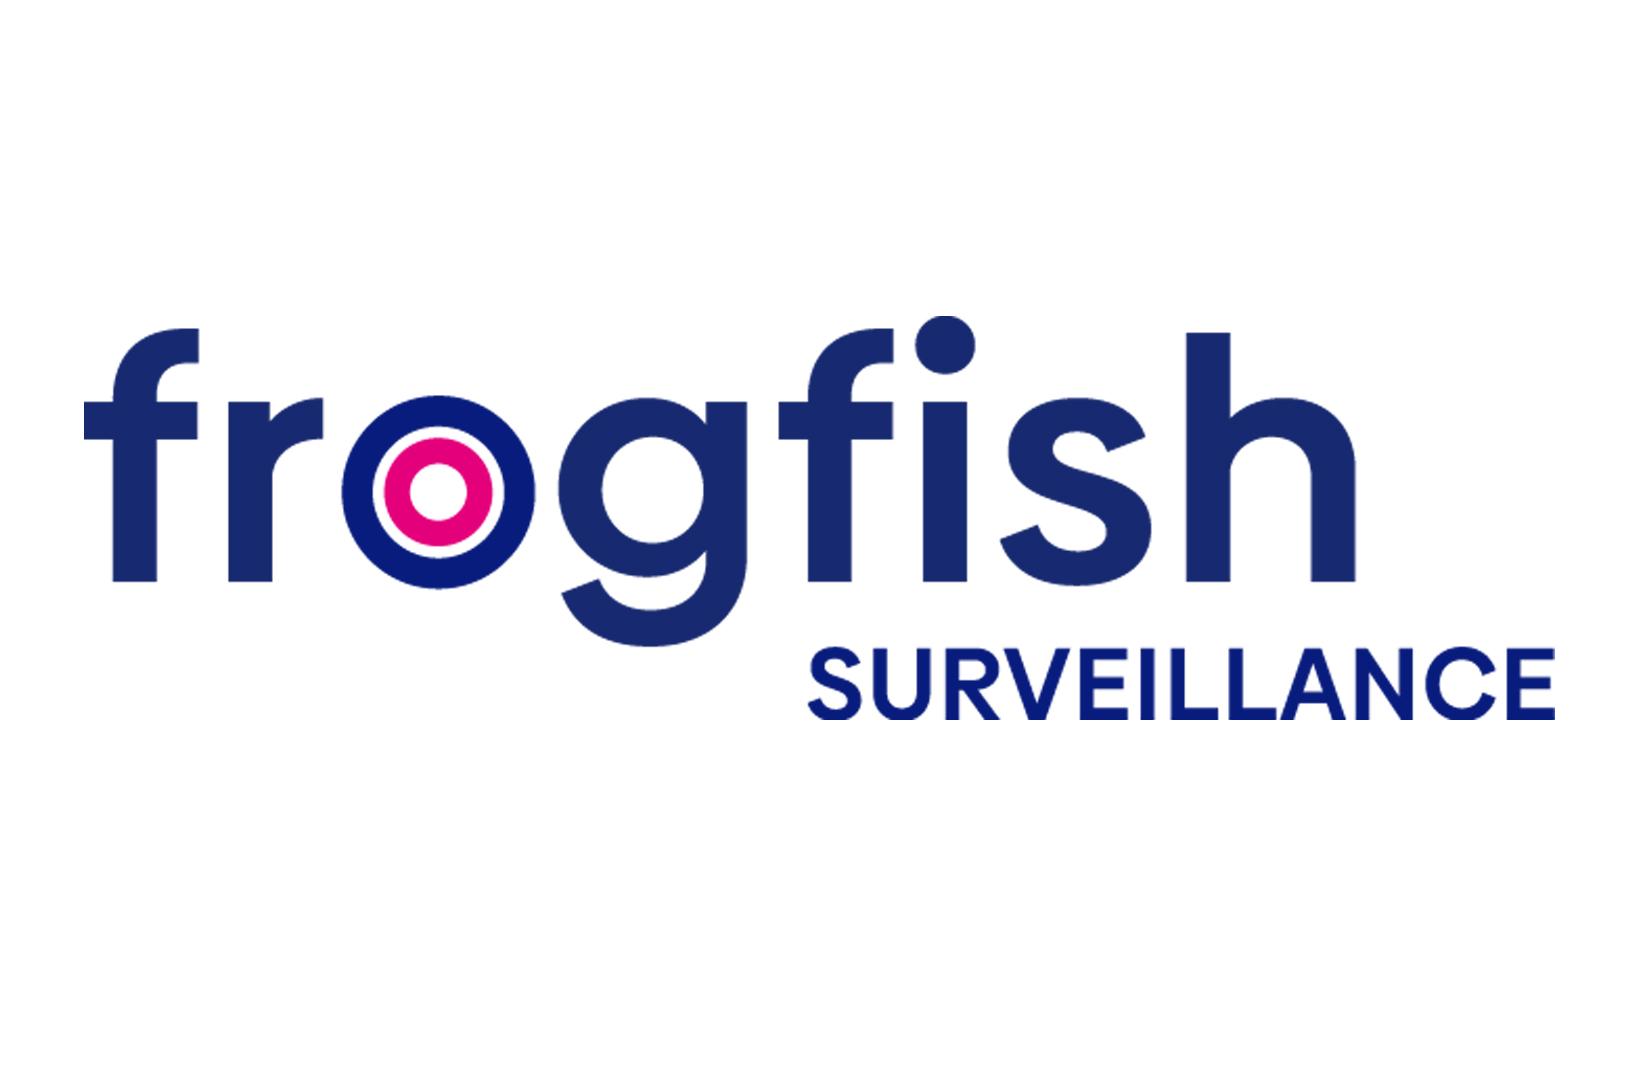 frogfish surveillance blue and pink logo